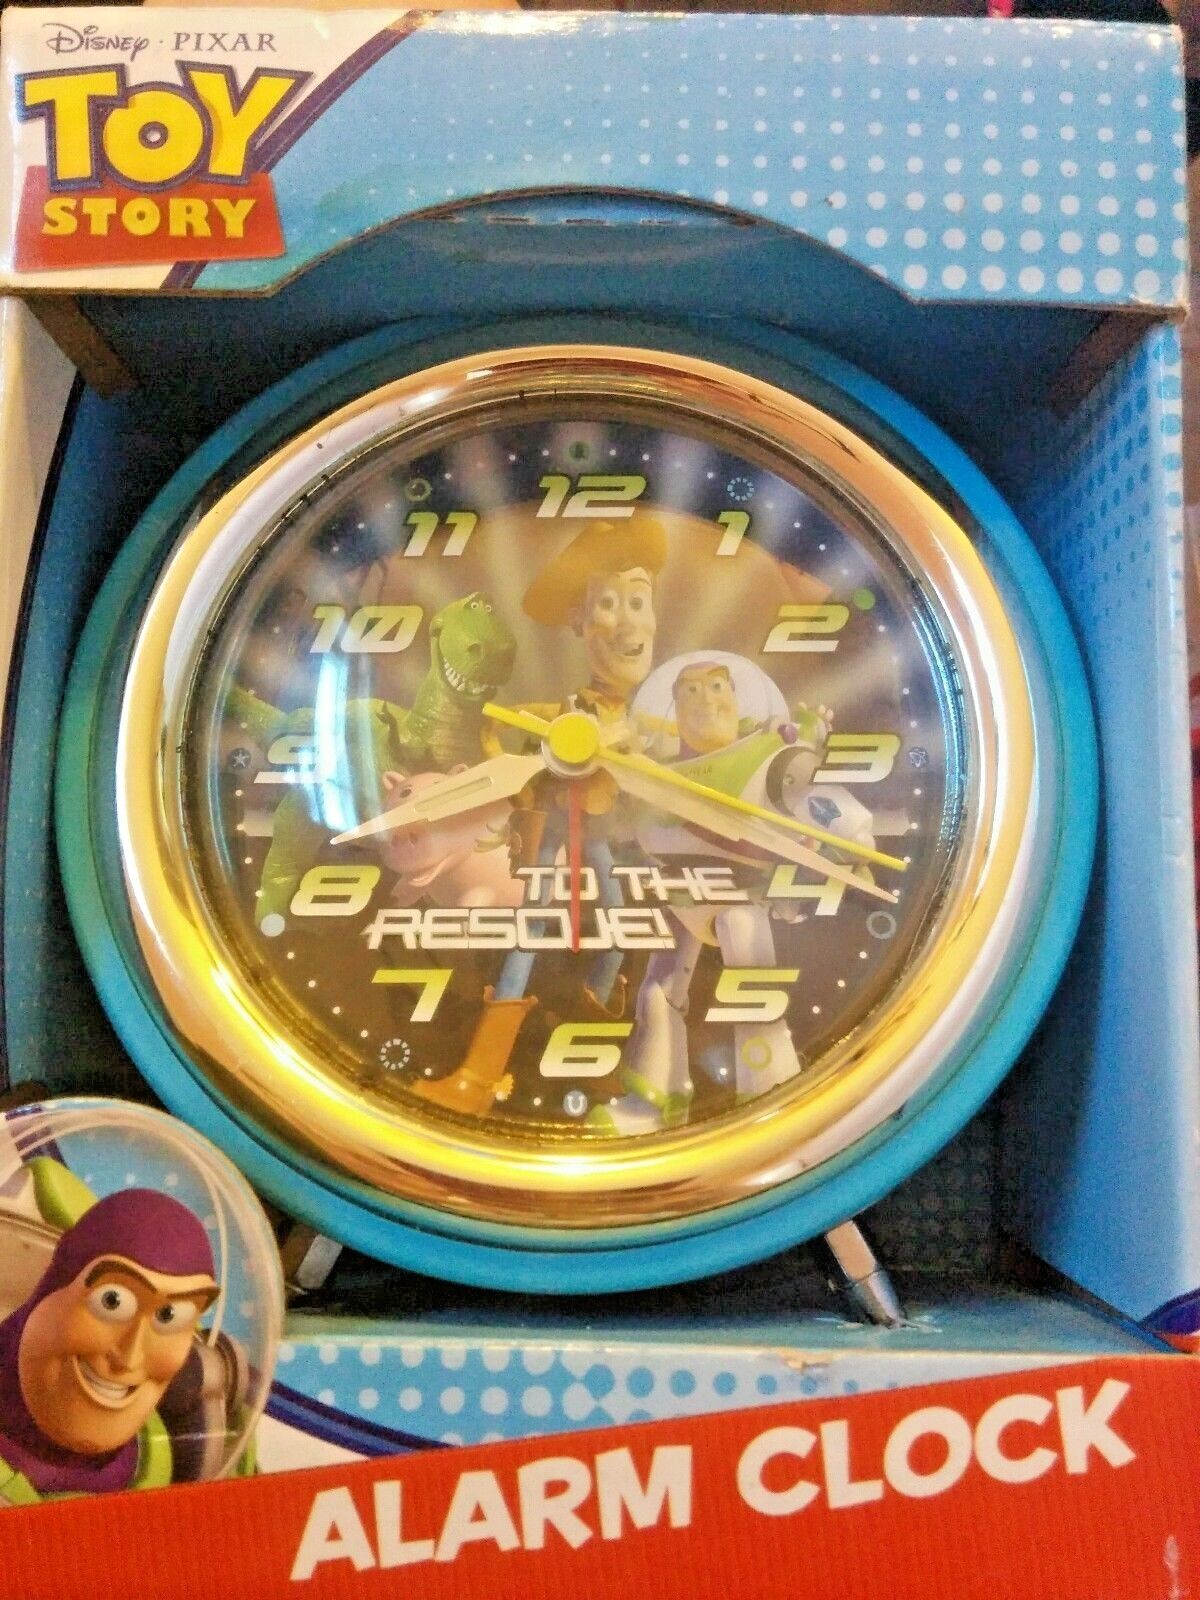 Disney Pixar TOY STORY 2 TROPICANA in CLOCK ALARM New Award Box Selling and selling